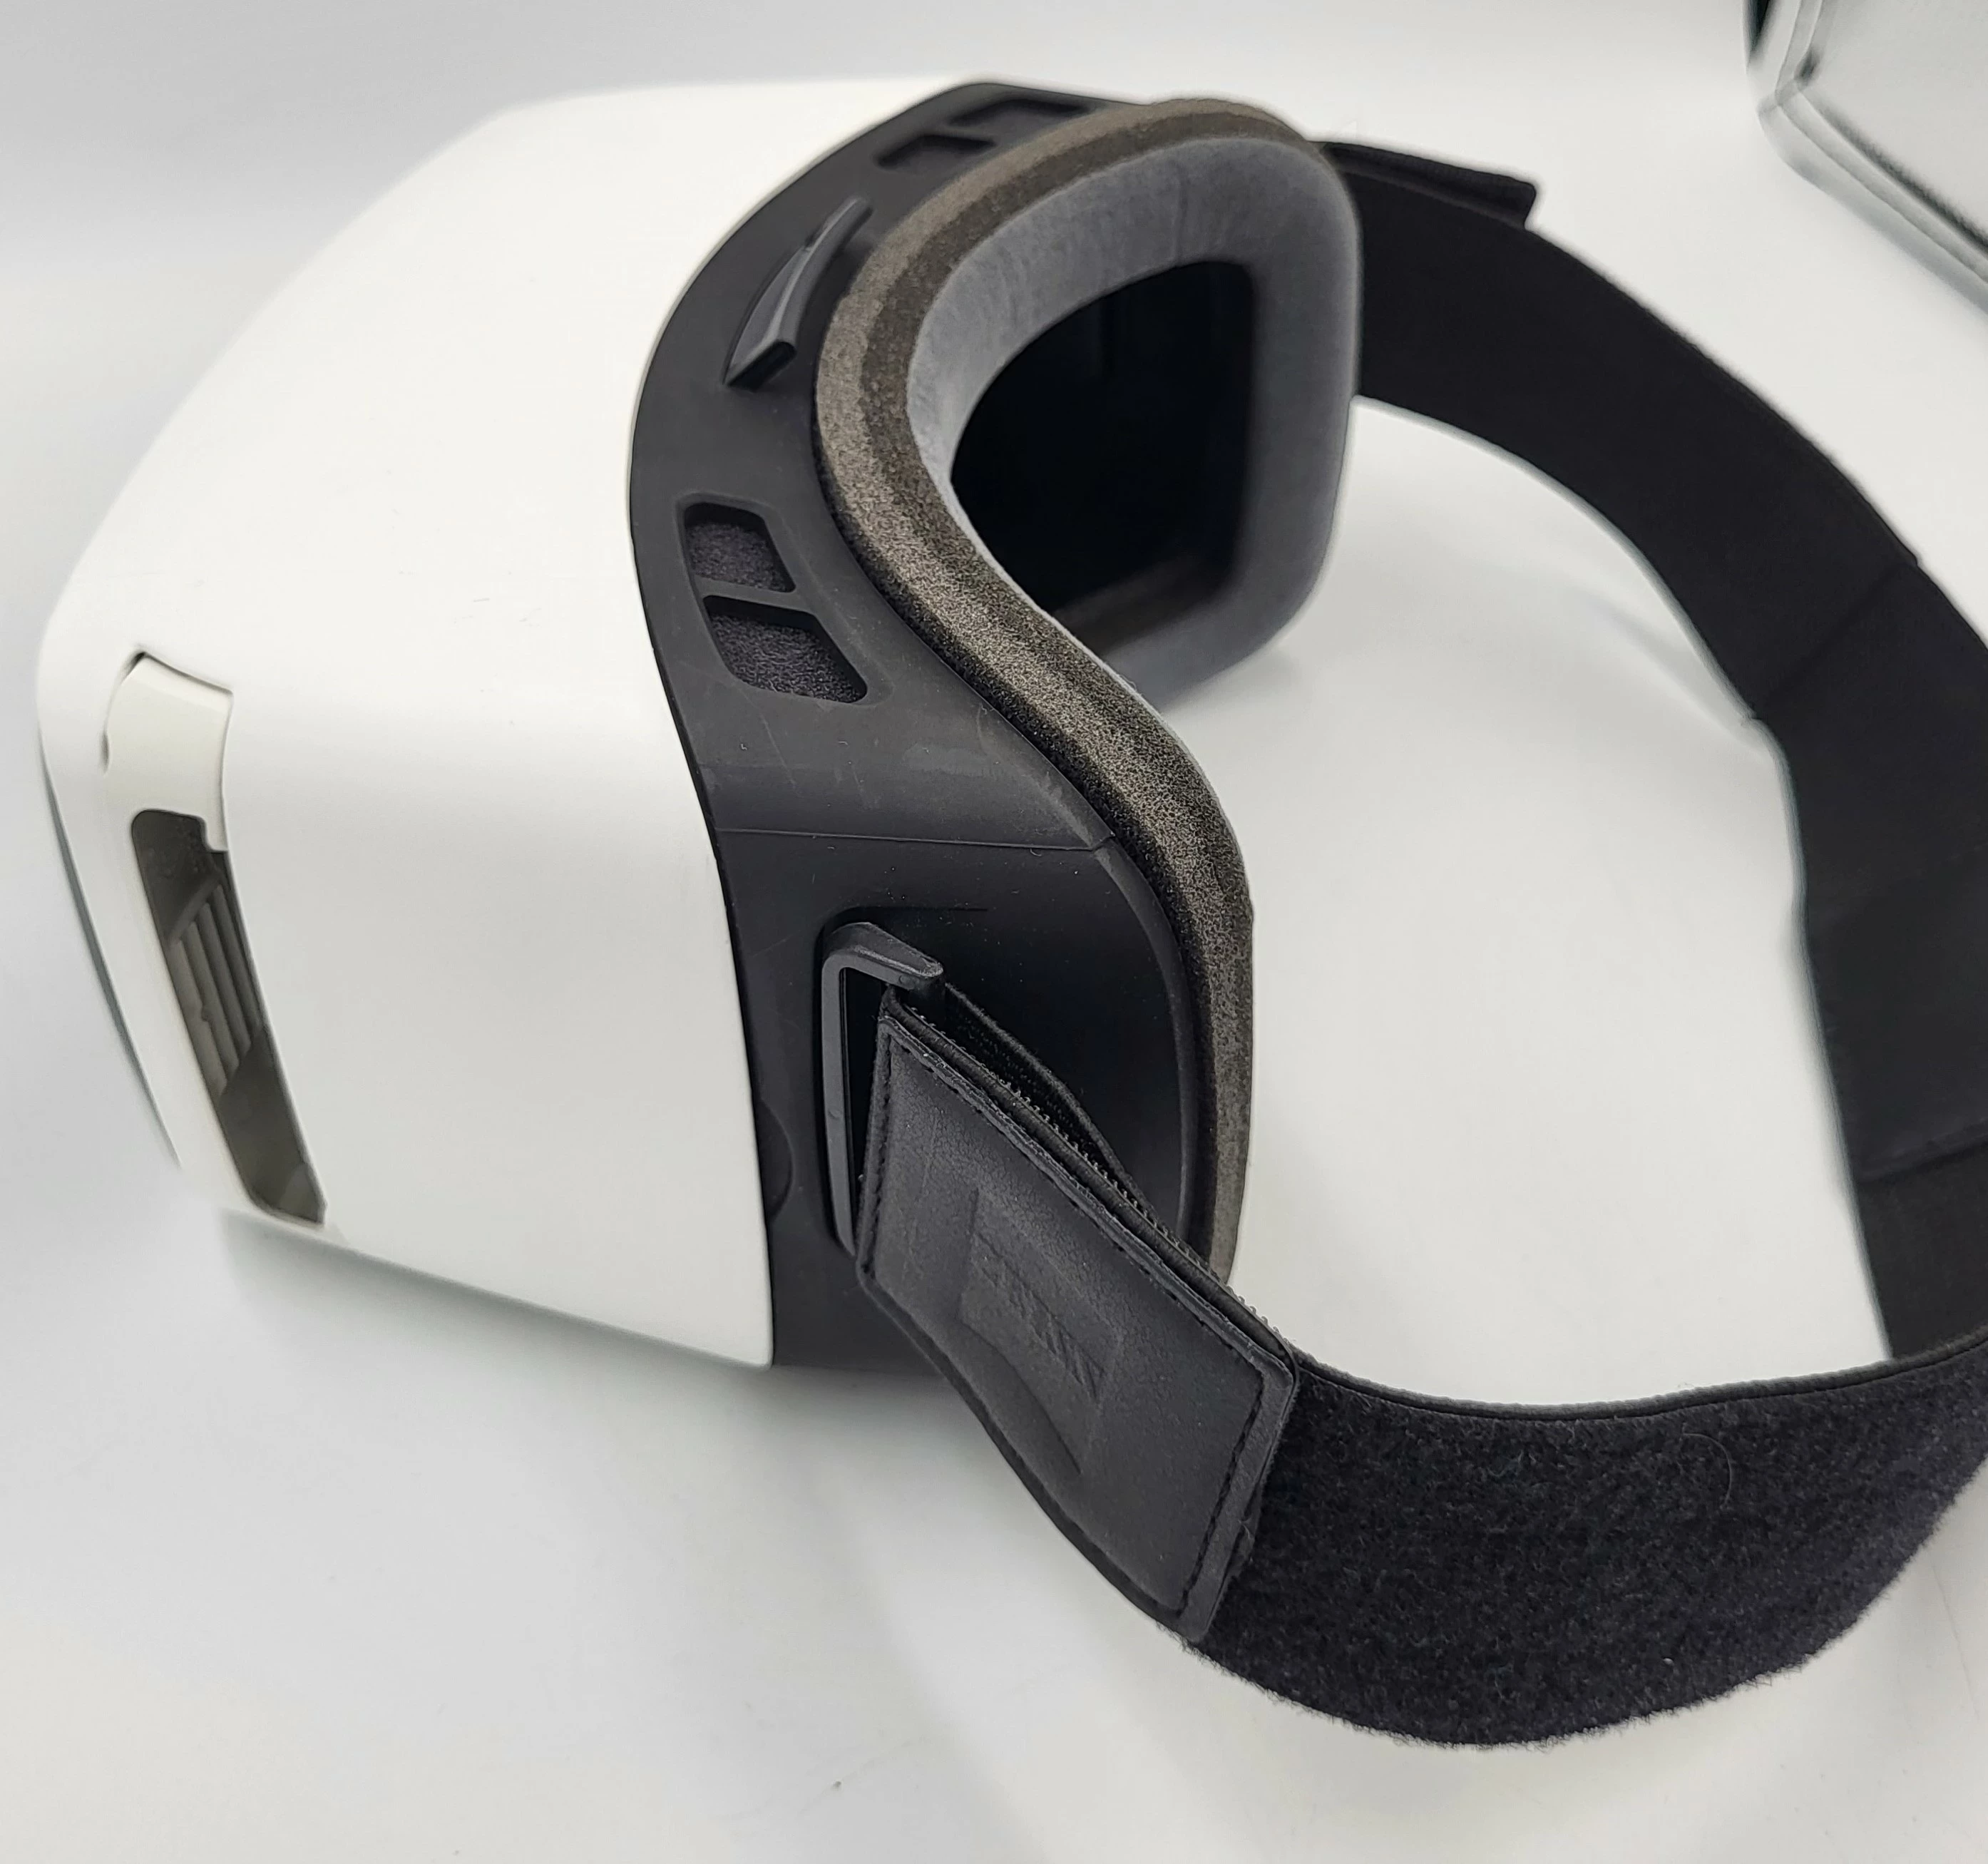 Kompliment Blodig spand GOGLE VR ZEISS VR ONE PLUS | Okulary VR | Loombard.pl